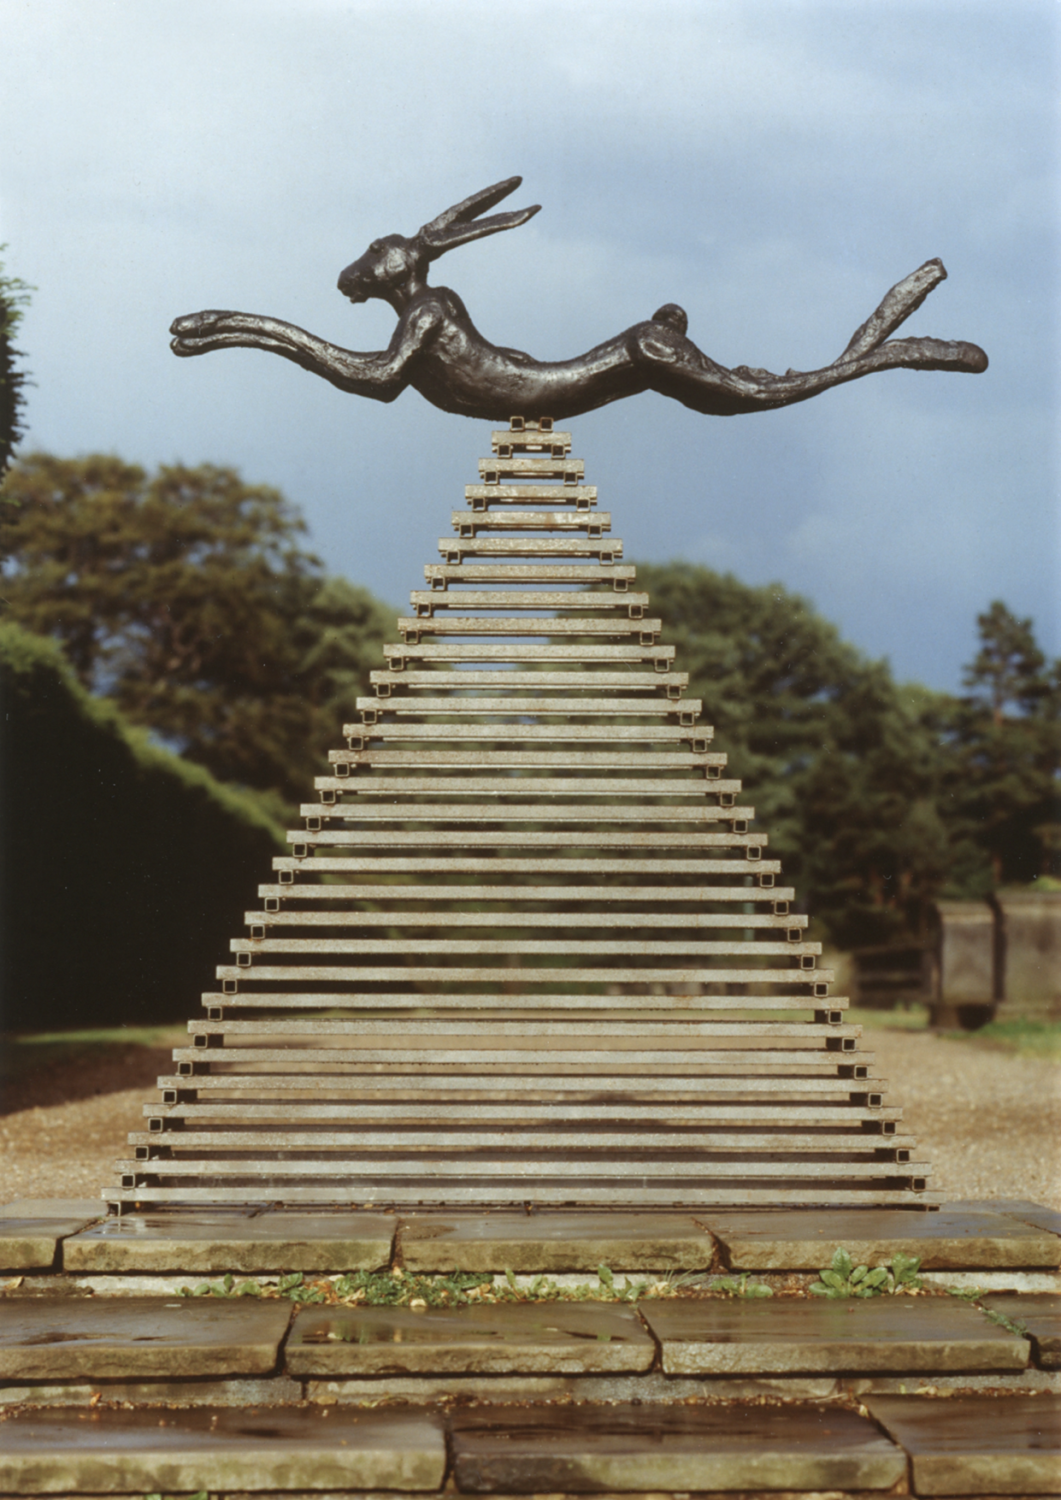 Six Foot Leaping Hare on Steel Pyramid